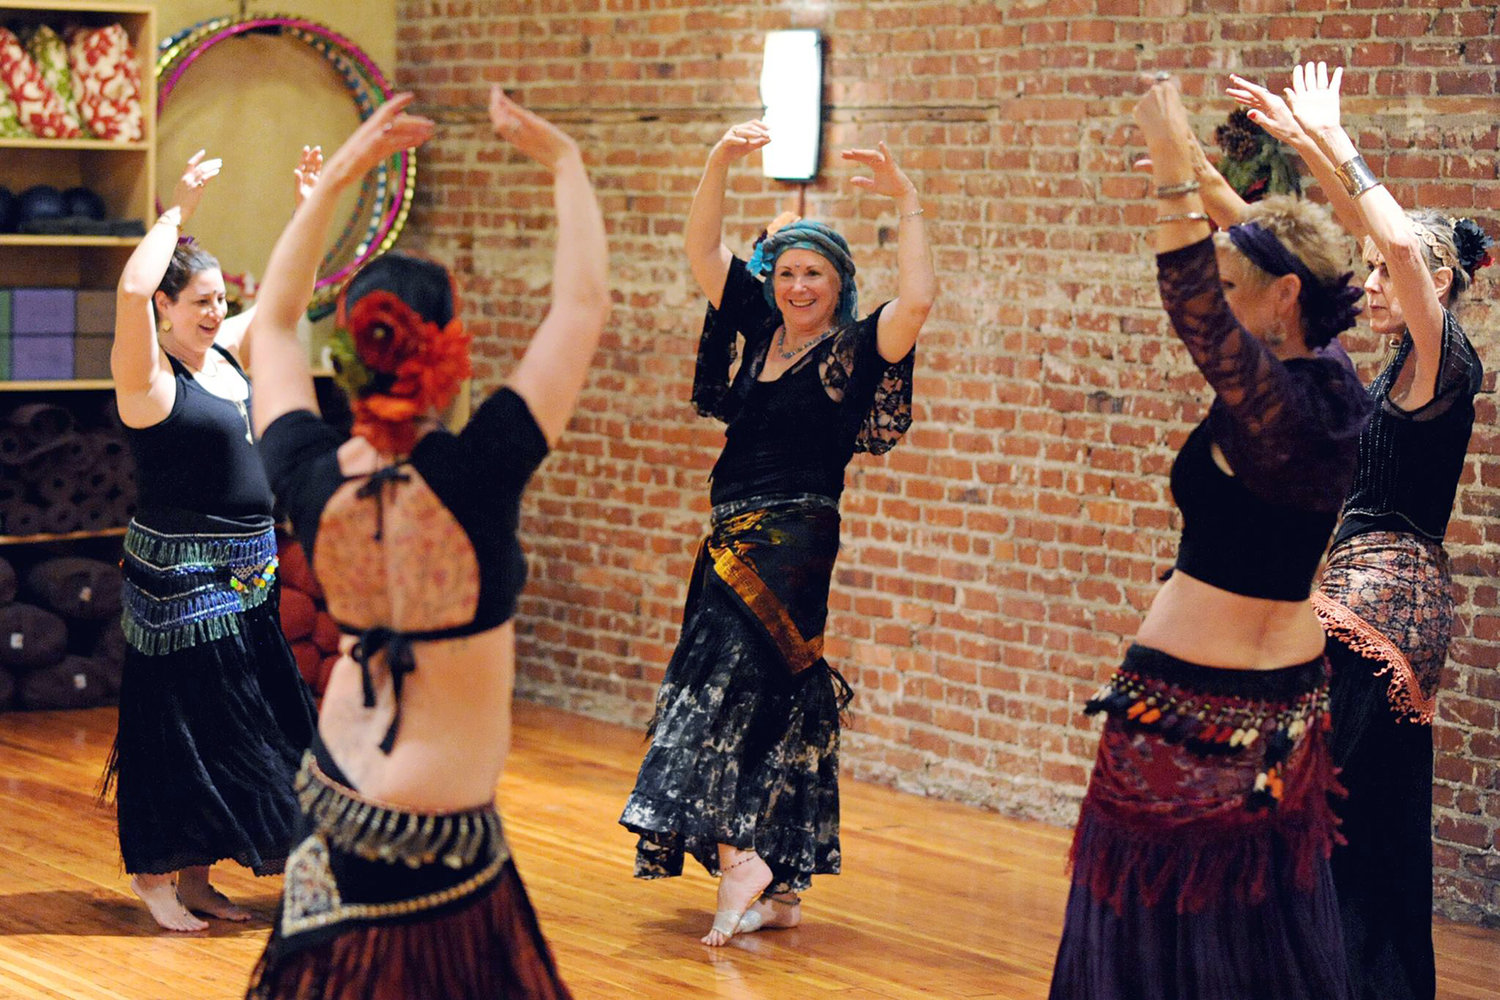 Tribal belly dancers workout at Embody Movement Studio and Boutique in downtown Centralia.